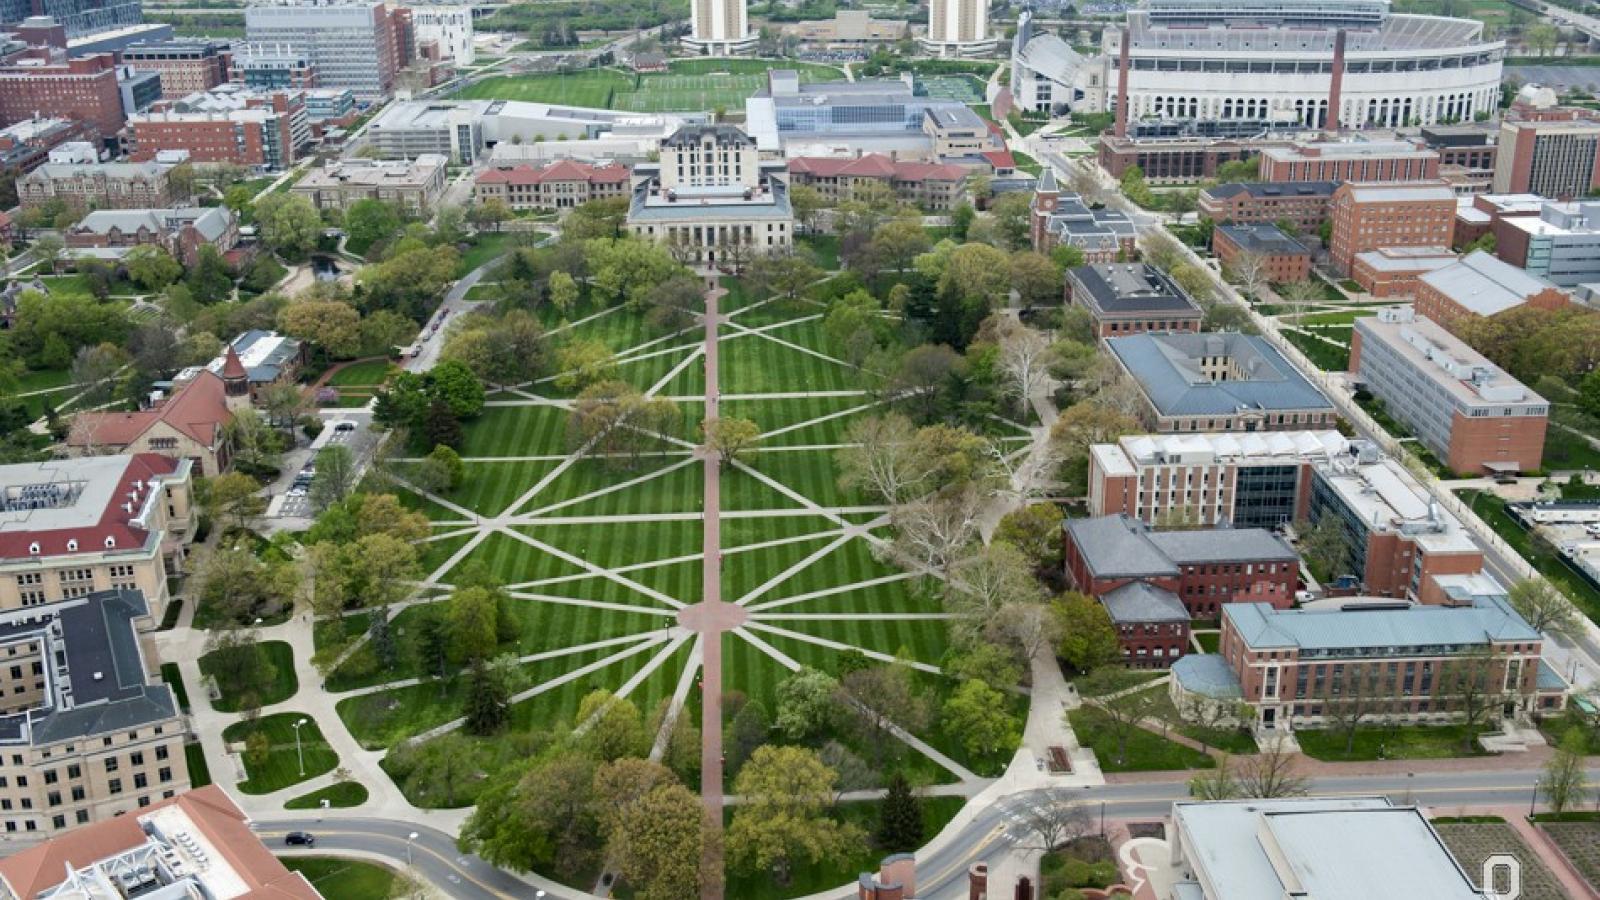 The Oval on OSU's campus